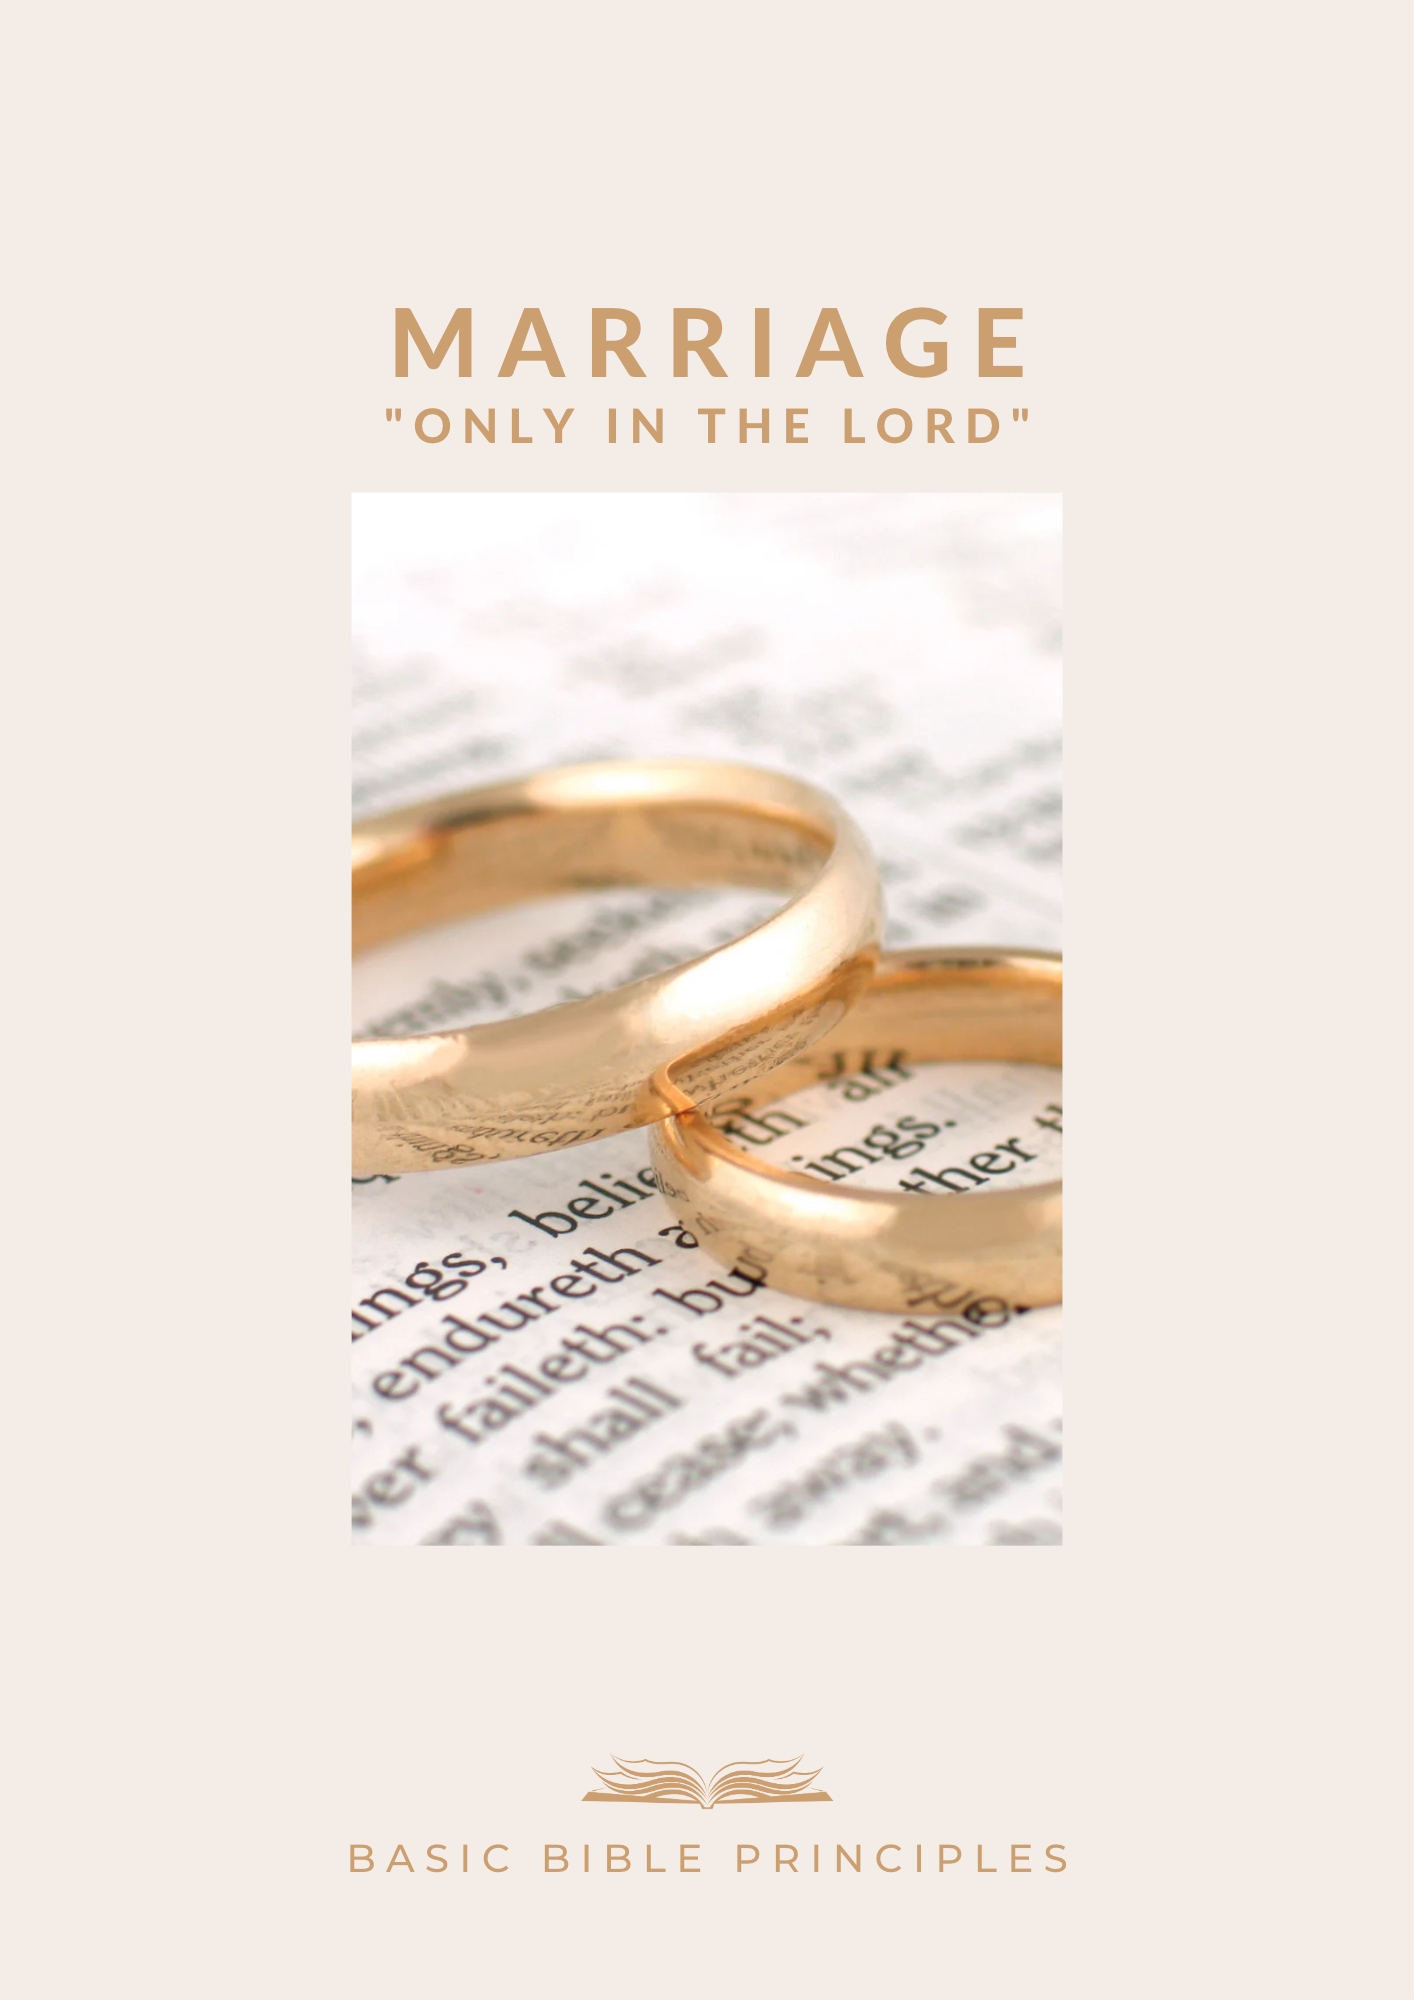 Basic Bible Principles: Marriage - 'ONLY IN THE LORD'